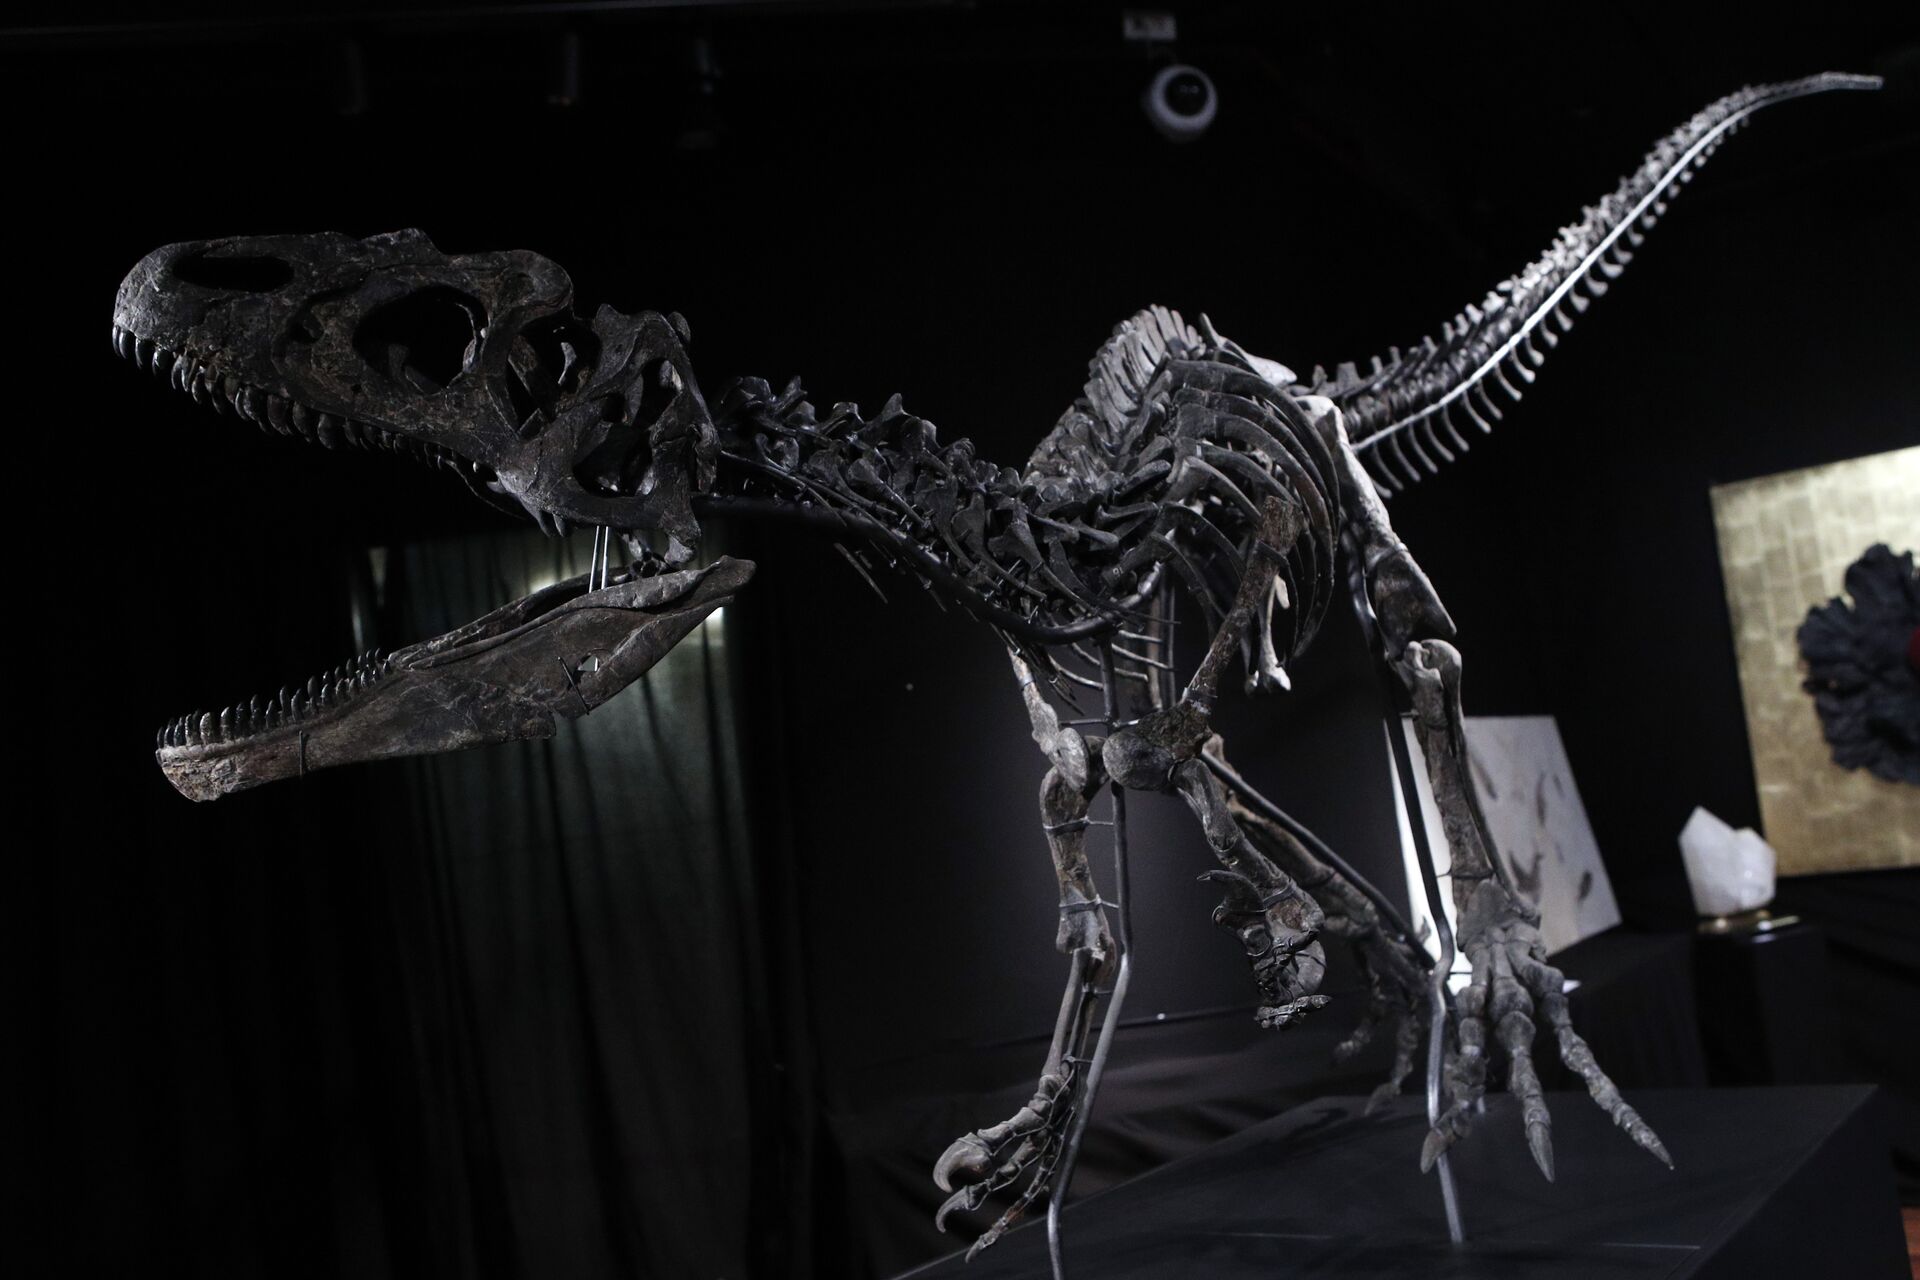 A Jurassic age (161-145 million years) dinosaur skeleton of an Allosaurus Jimmadseni, found in Wyoming, U.S. is displayed at Drouot auction house, in Paris, Wednesday April 11, 2018. The Allosaurus with a Diplodocus will be auctioned as part of a collection entitled 'Nature et Merveilles'. - Sputnik International, 1920, 23.10.2021